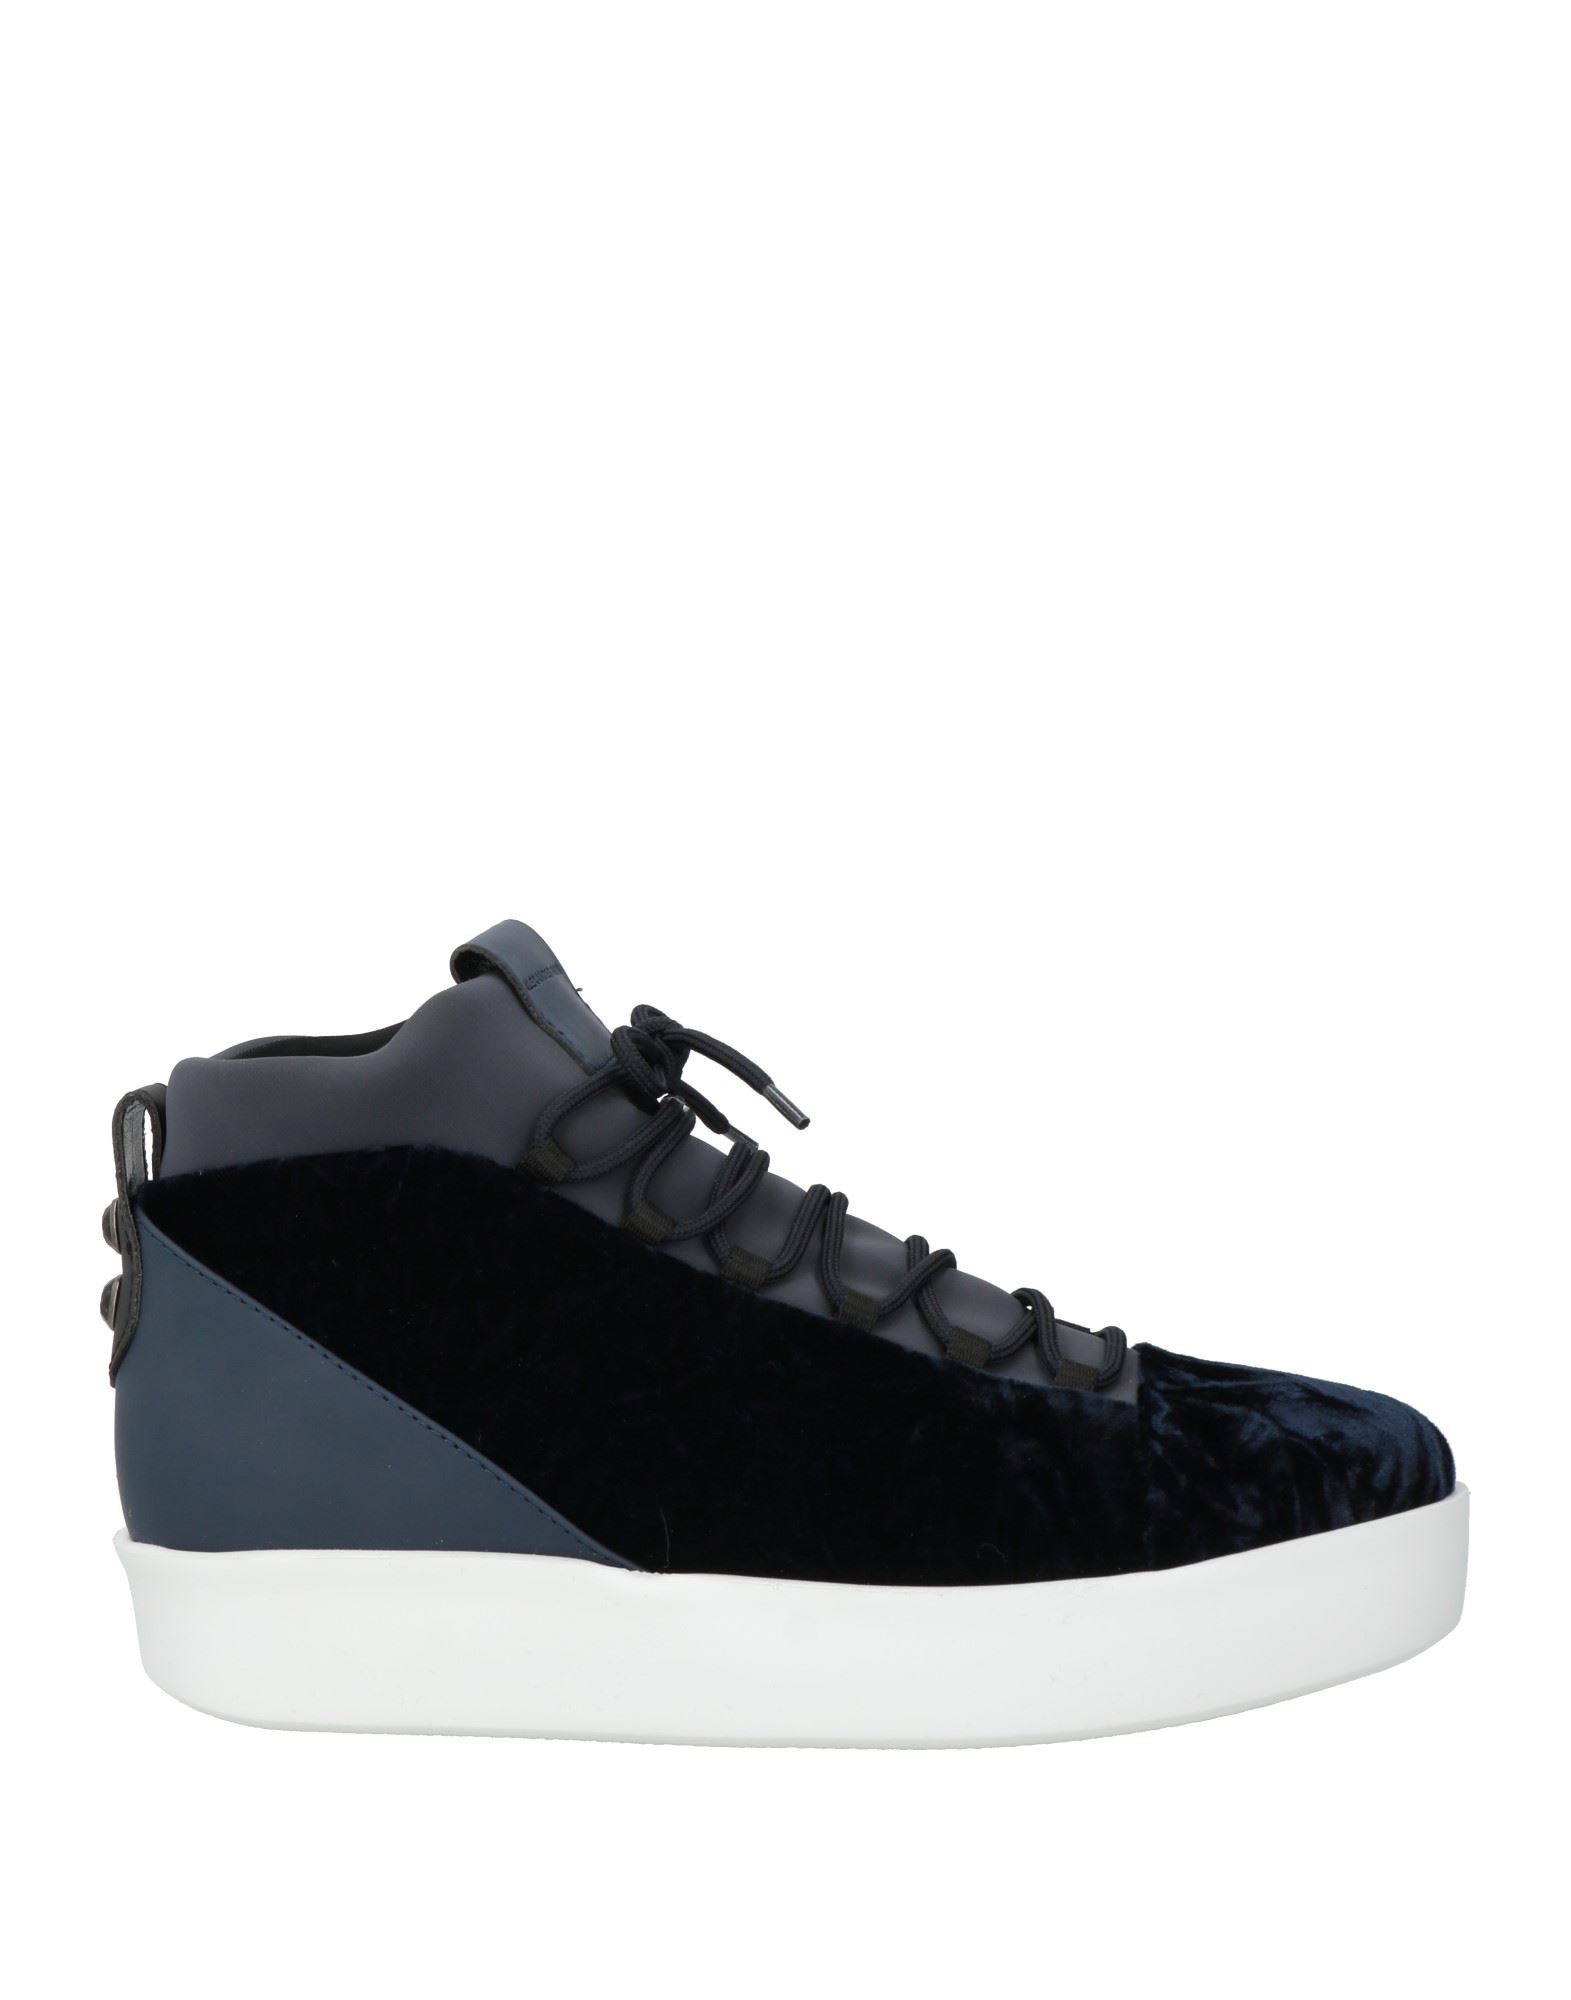 ALEXANDER SMITH ALEXANDER SMITH WOMAN SNEAKERS MIDNIGHT BLUE SIZE 10 LEATHER, TEXTILE FIBERS,11501053QX 5